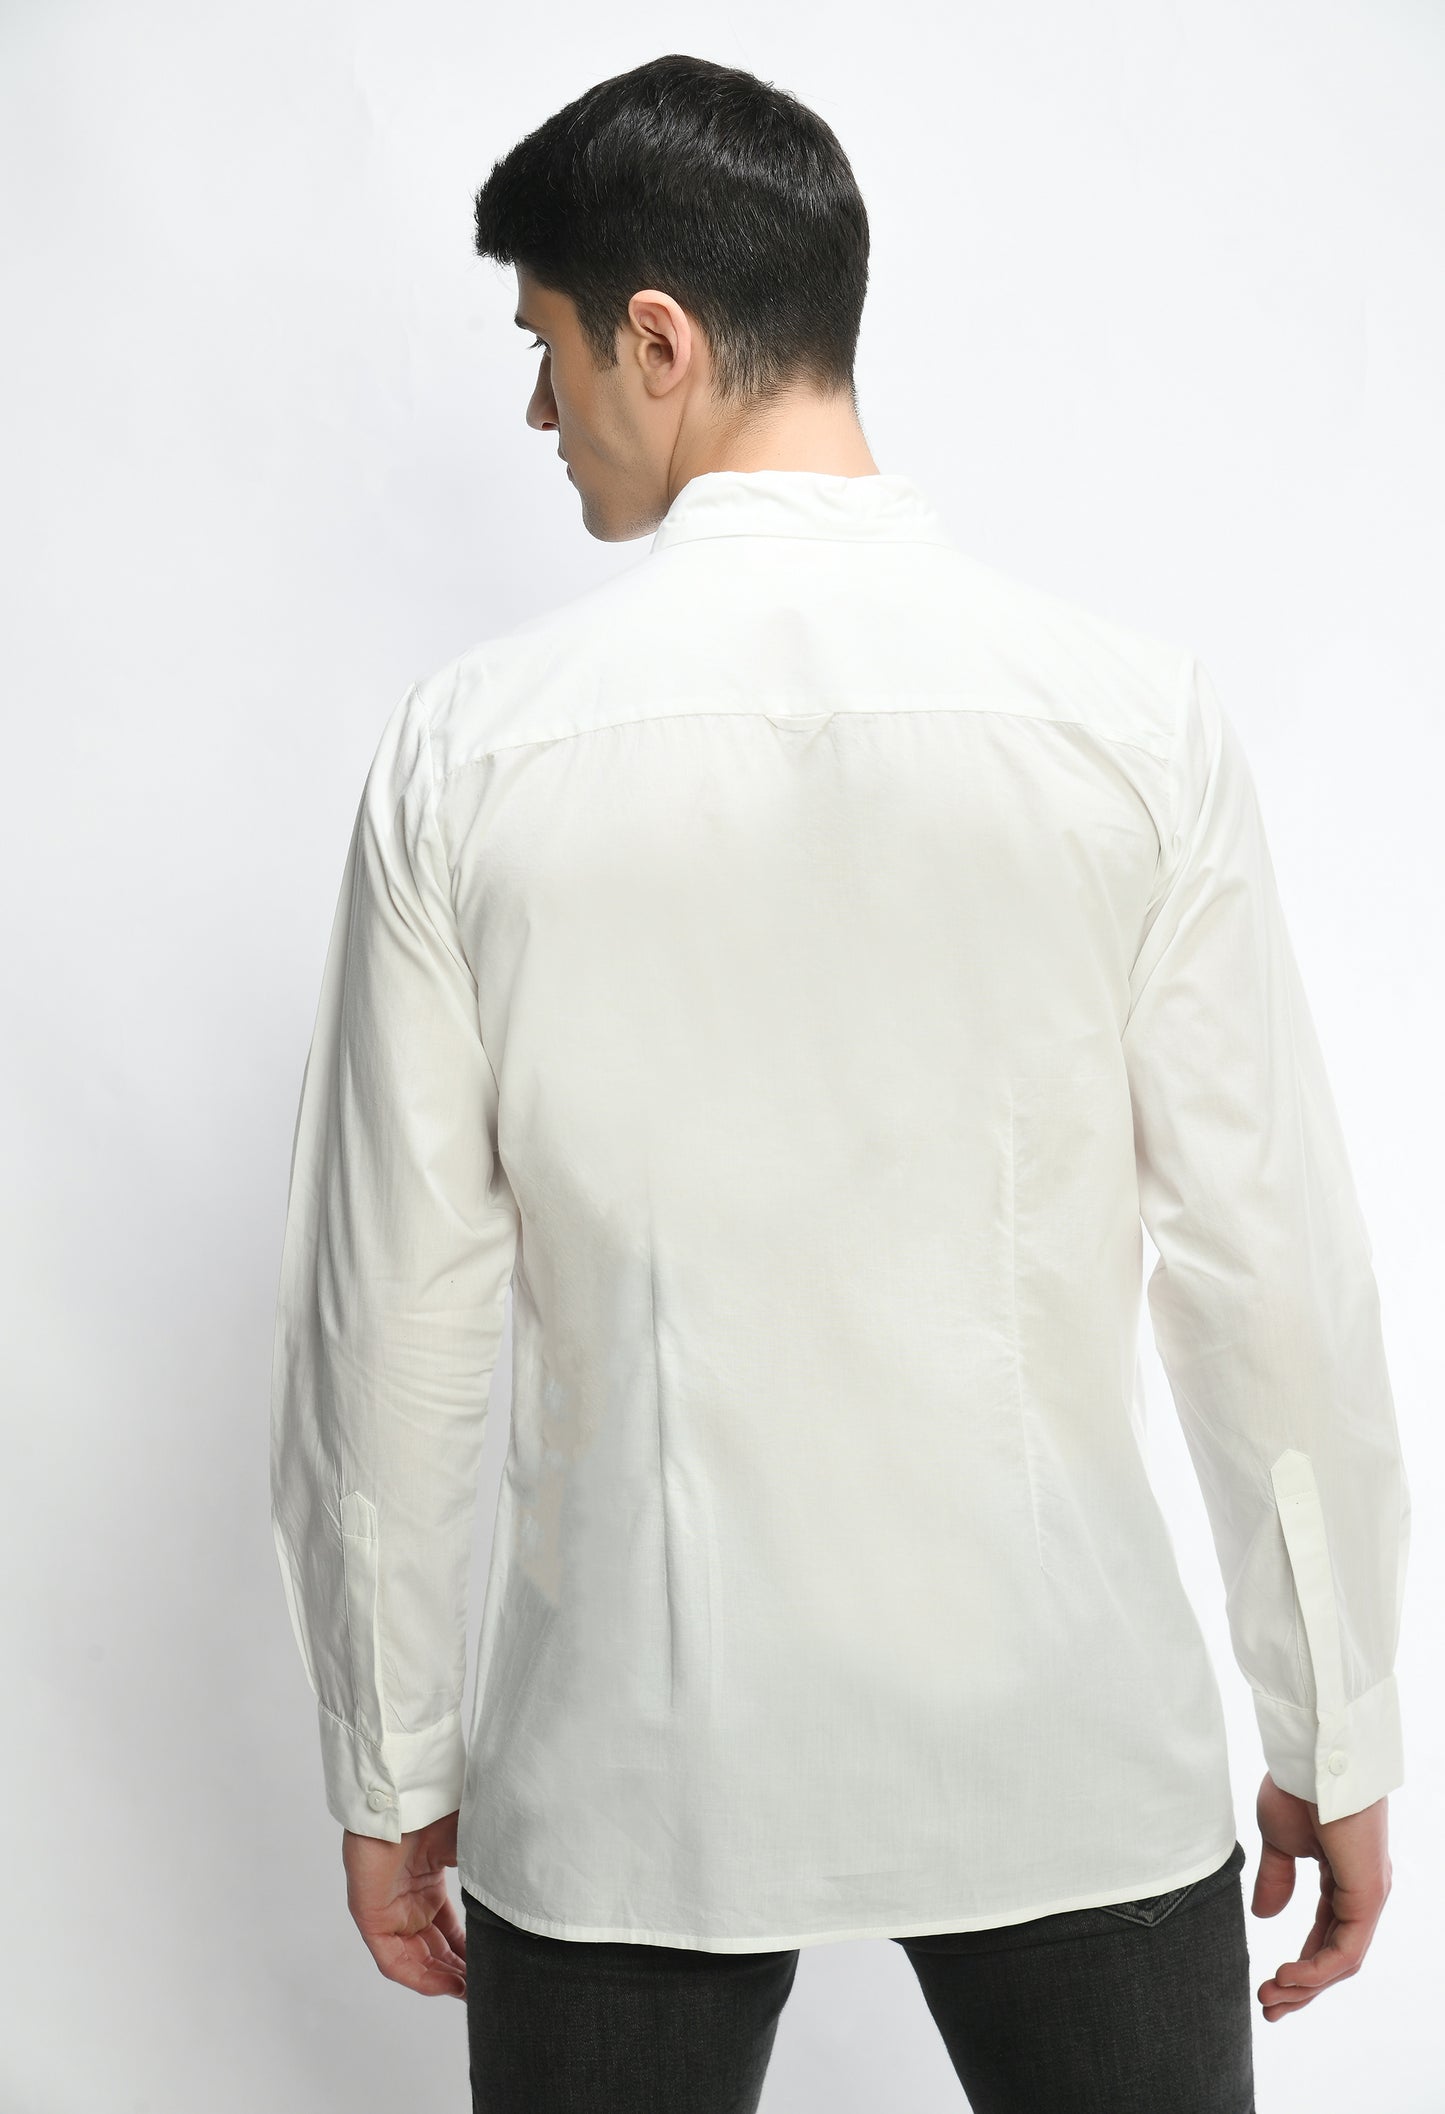 A white cotton shirt showcasing pintex lines in the front in diagonal pattern.